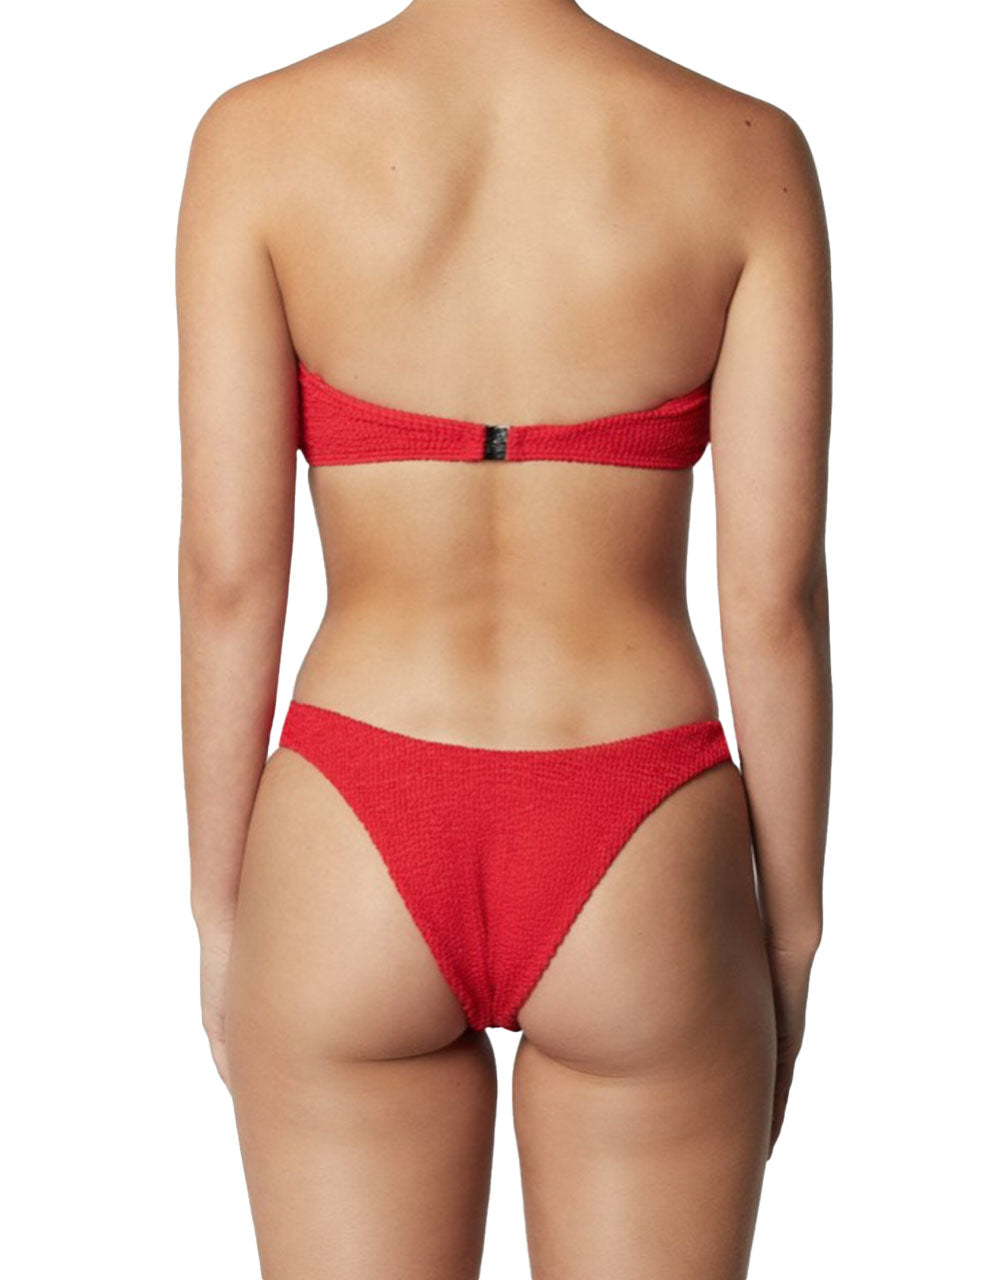 The Knot Bandeau- Crimped Red